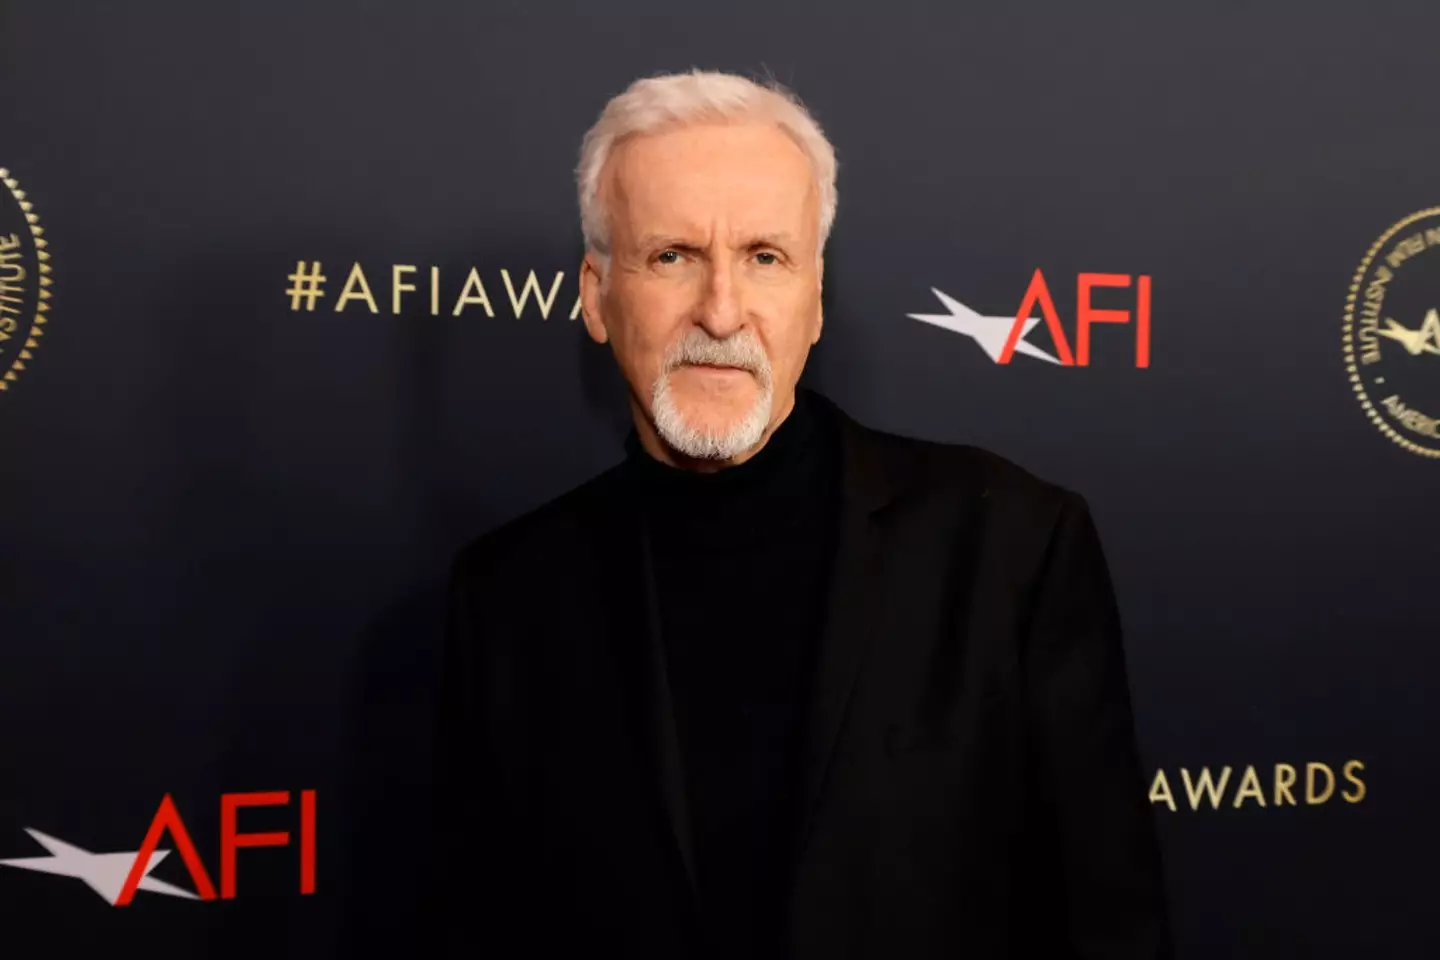 James Cameron has given his take on the rapid advancements of AI technology.